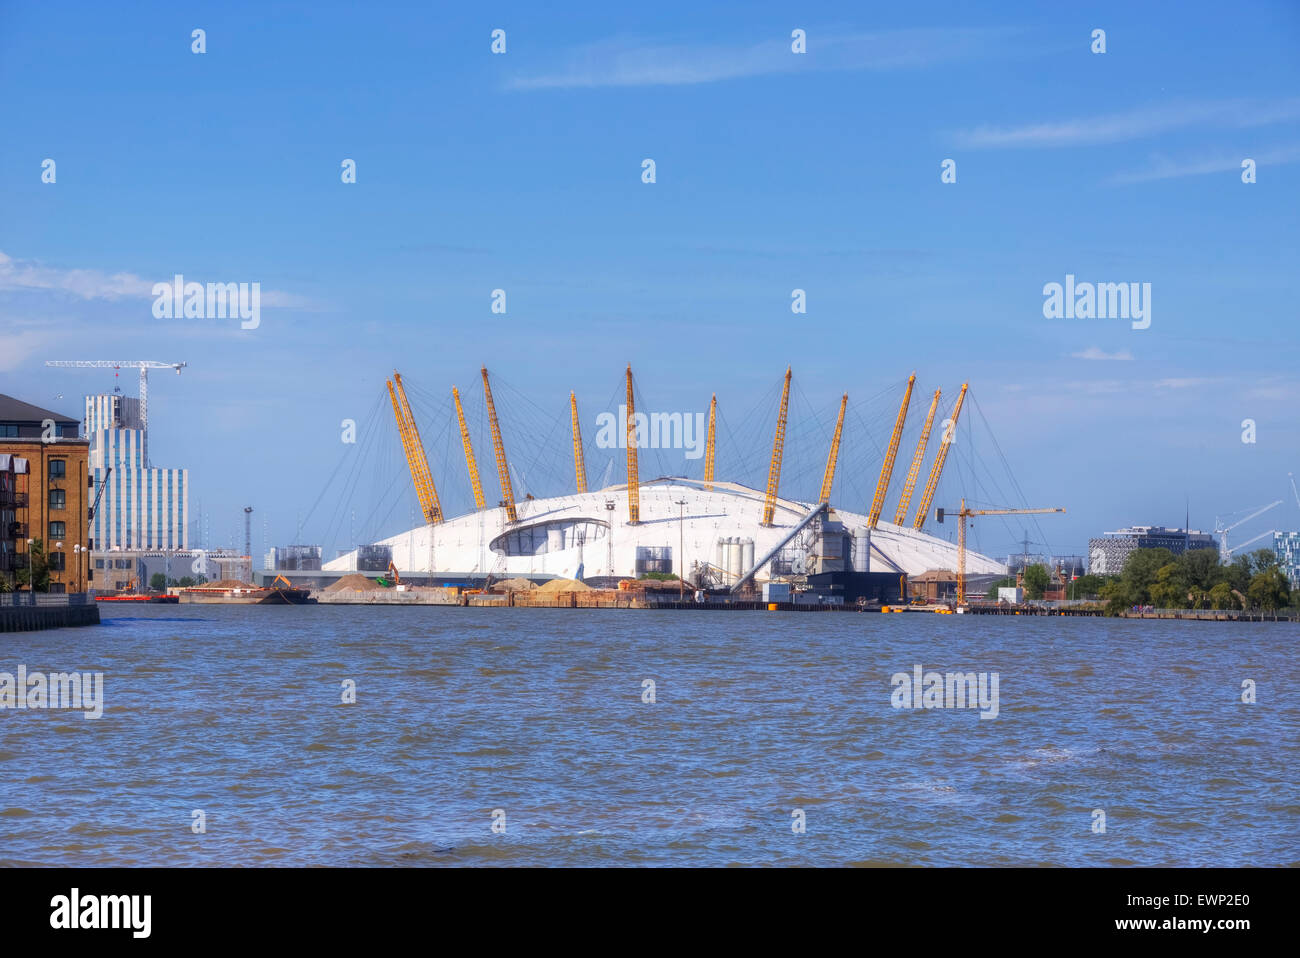 L'O2 Arena, Greenwich, London, England, United Kingdom Banque D'Images